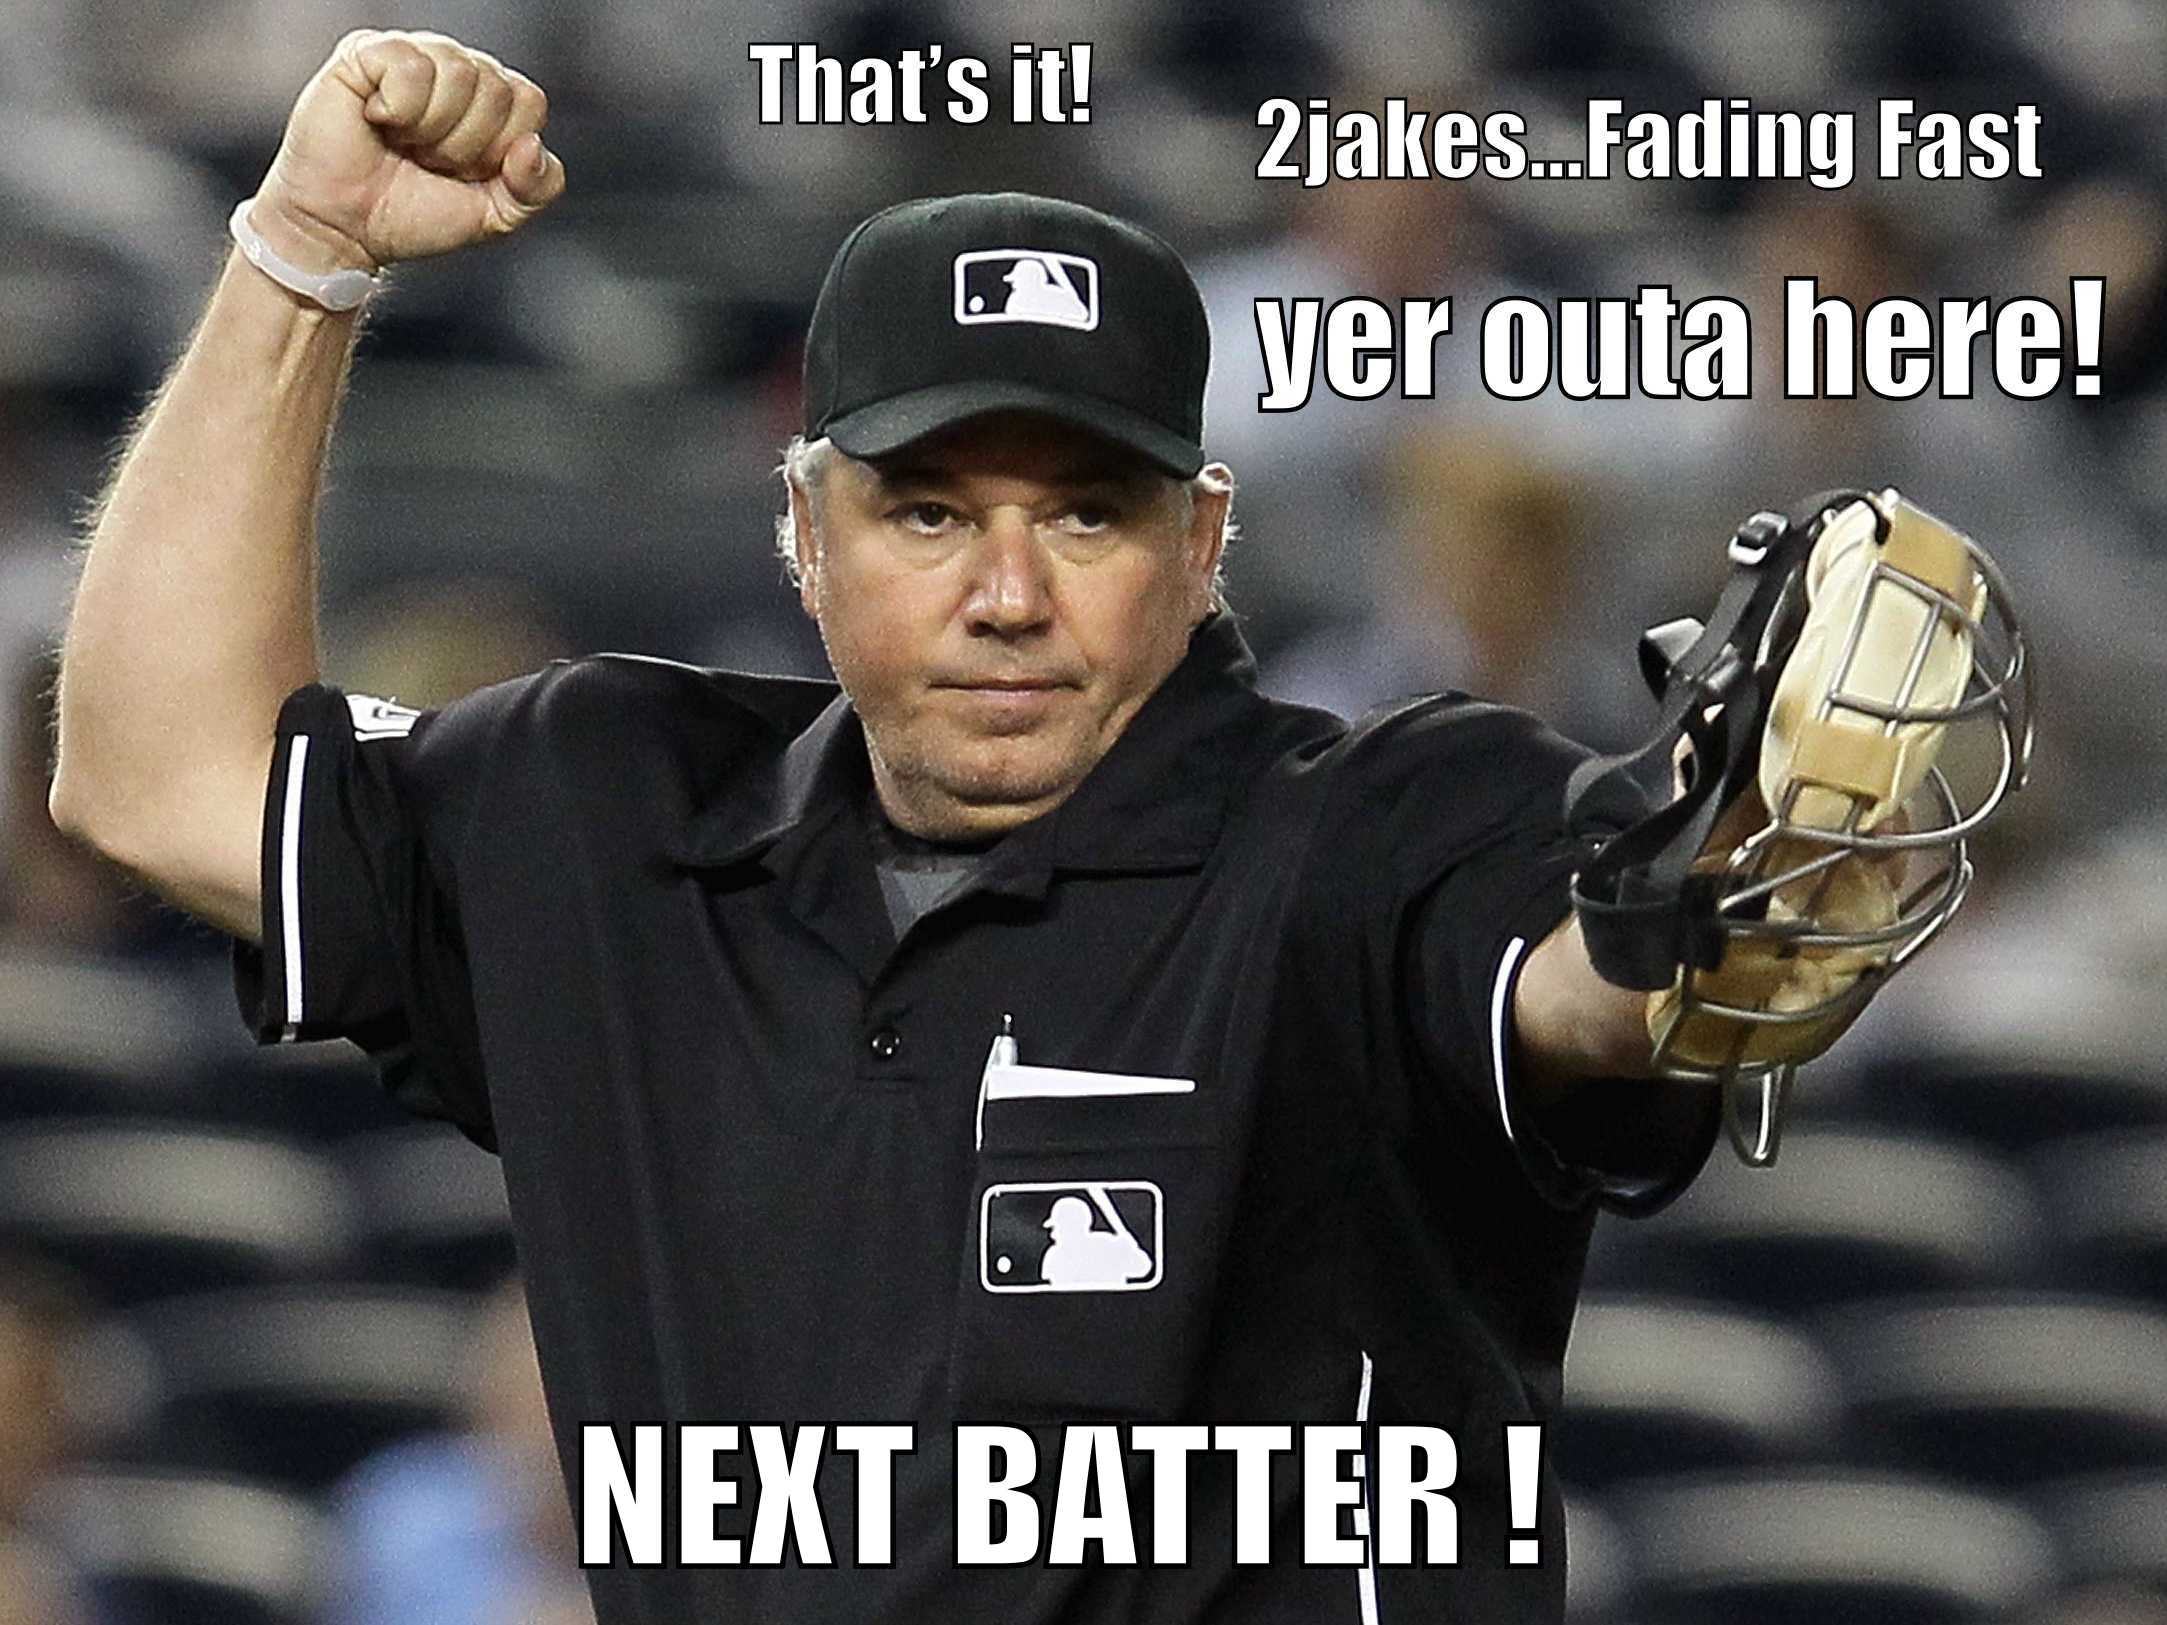 umpire-confronts-player-over-body-language-then-calls-player-a-liar-after-game.jpg